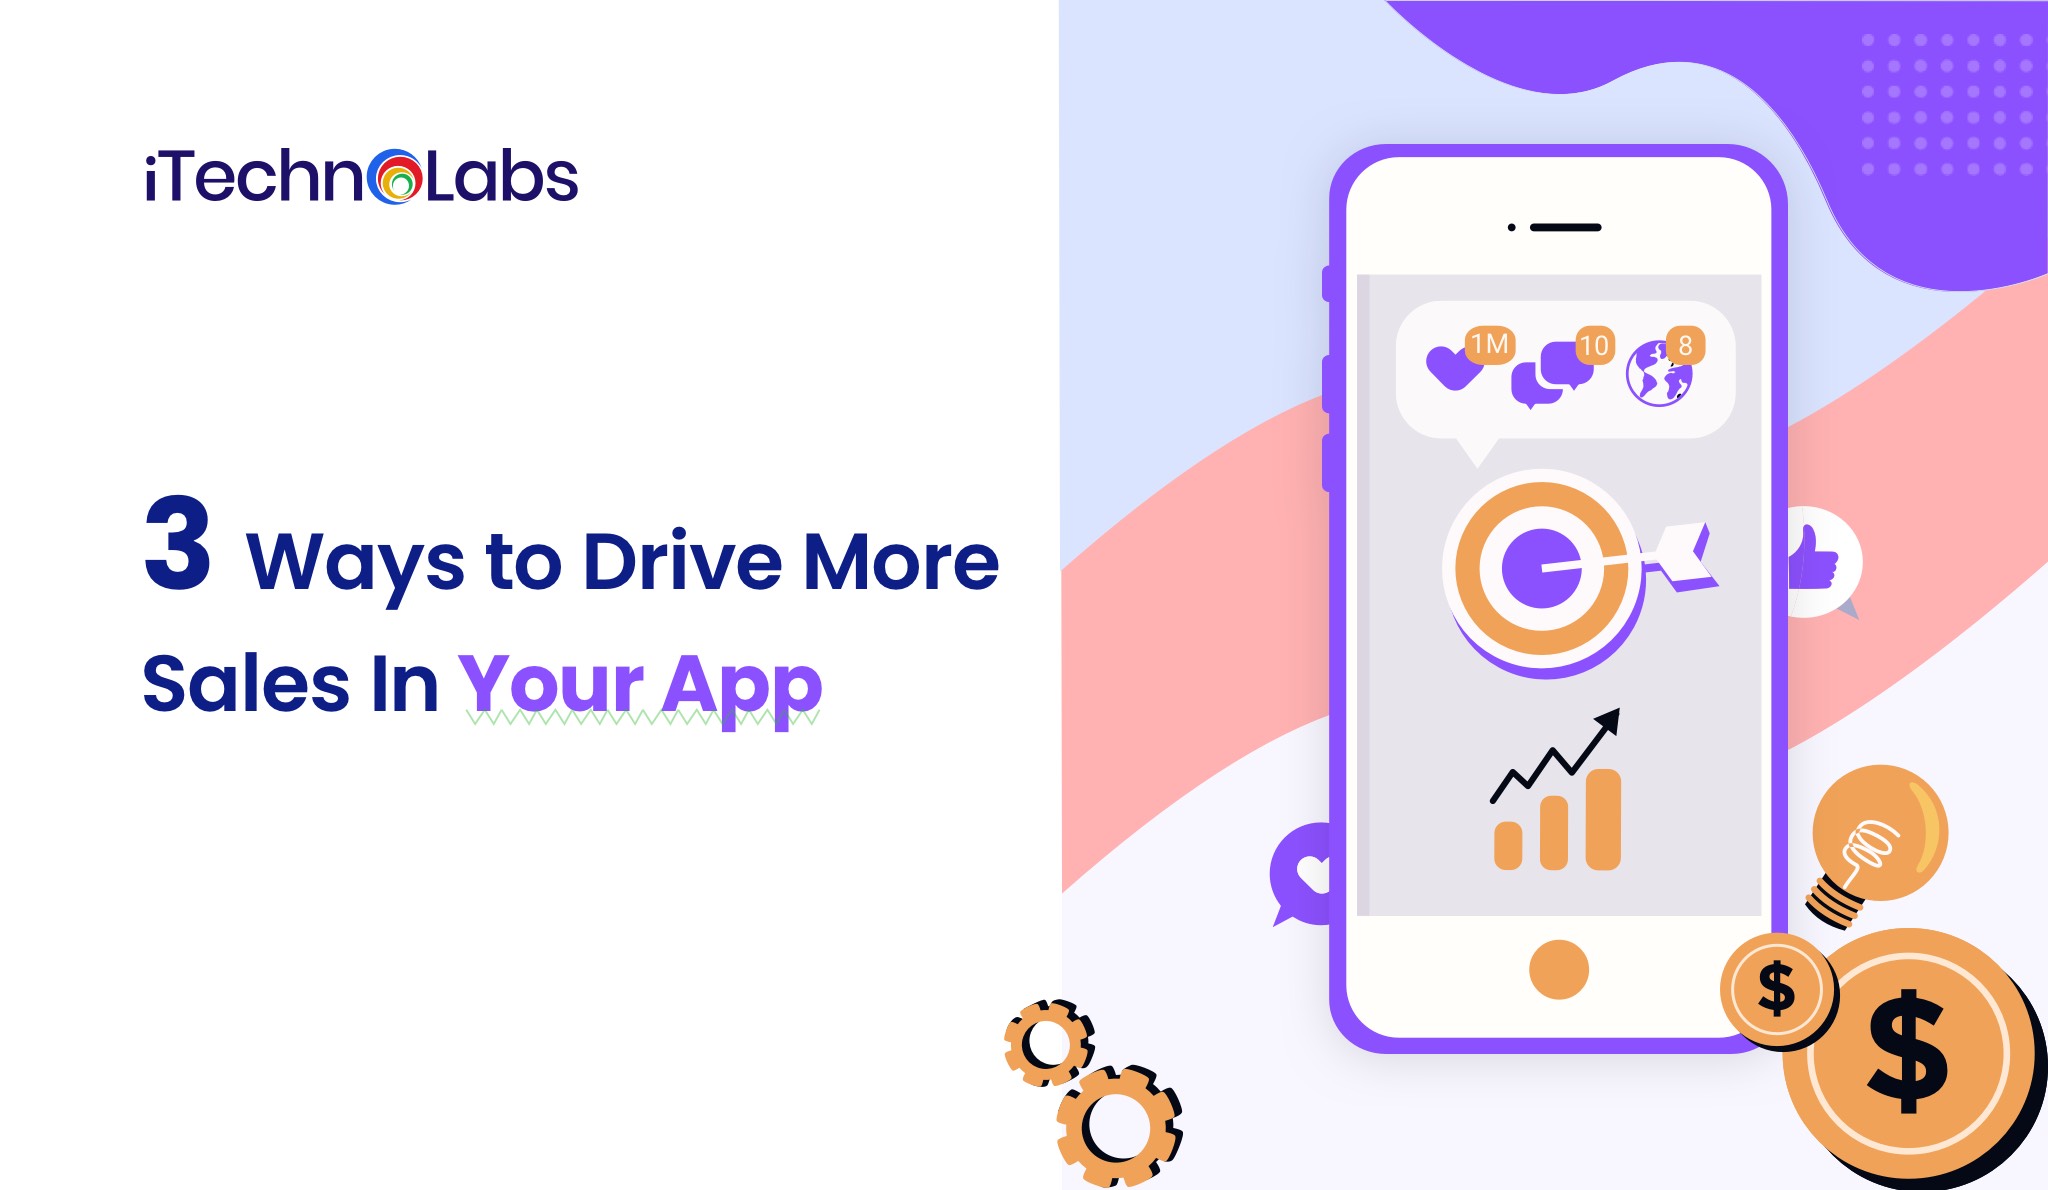 3 Ways to Drive More Sales In Your App